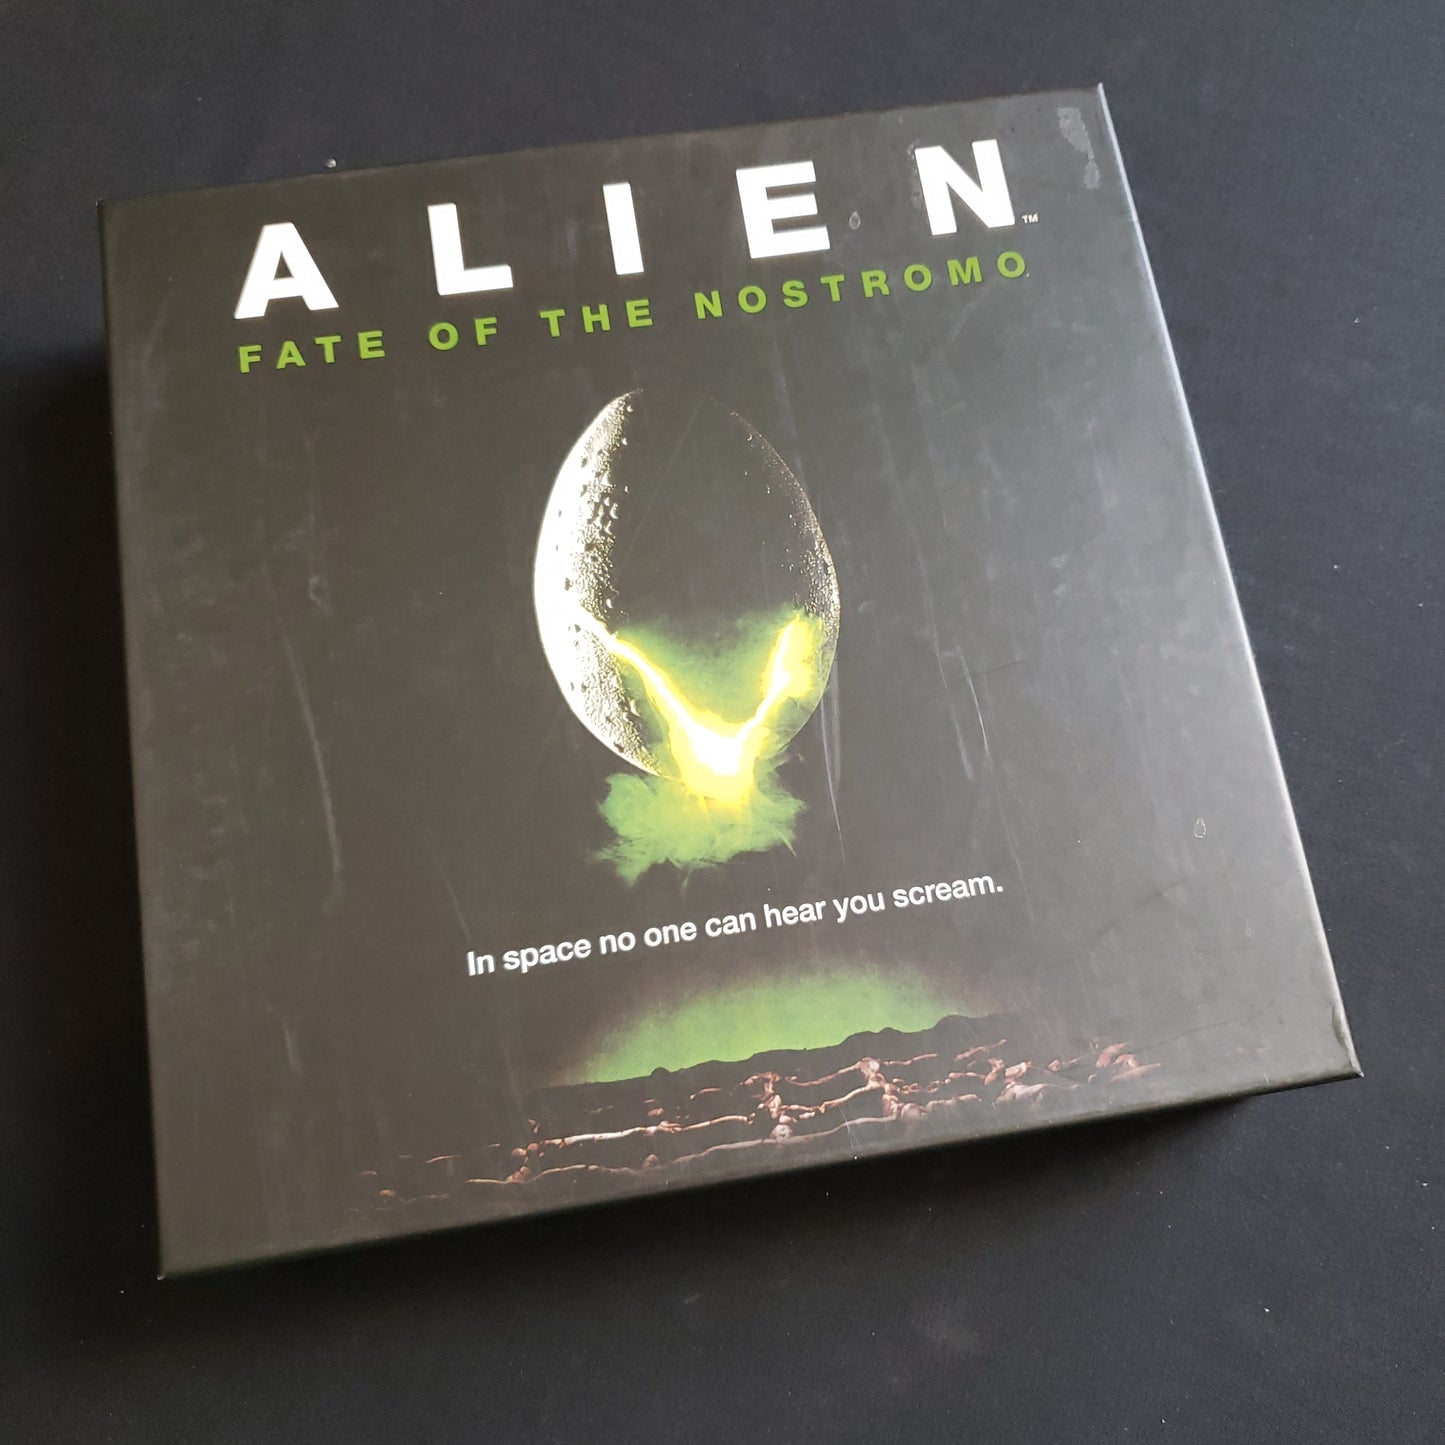 Image shows the front cover of the box of the Alien: Fate of the Nostromo board game